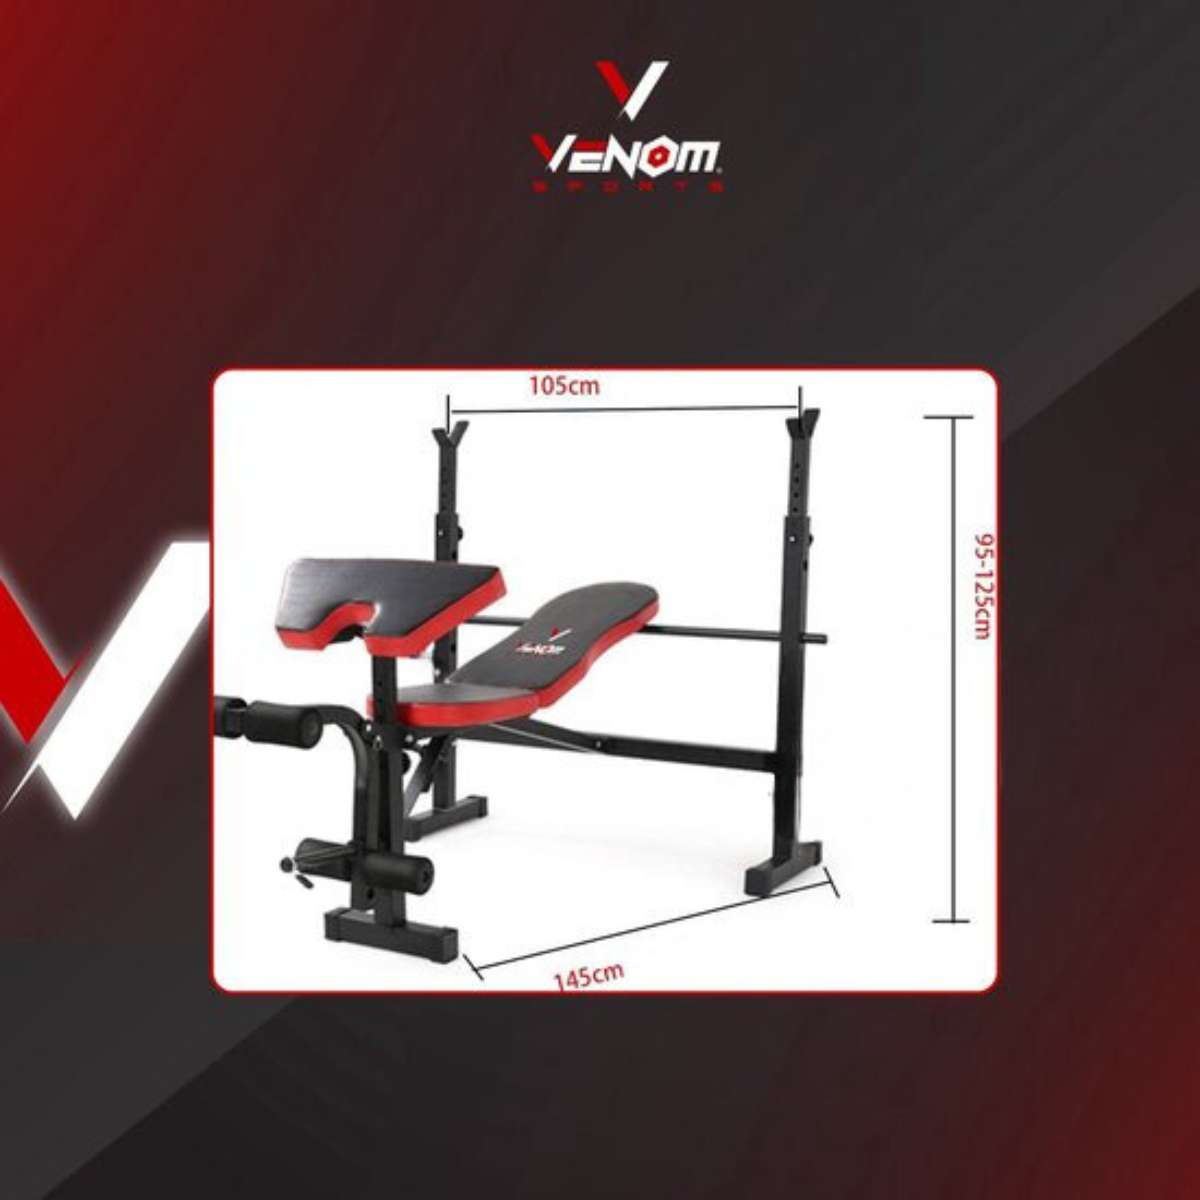 Nancy's VENOM Sports Fitness Bench - Weight Bench - Power Station - Multifunctional - Collapsible - Adjustable